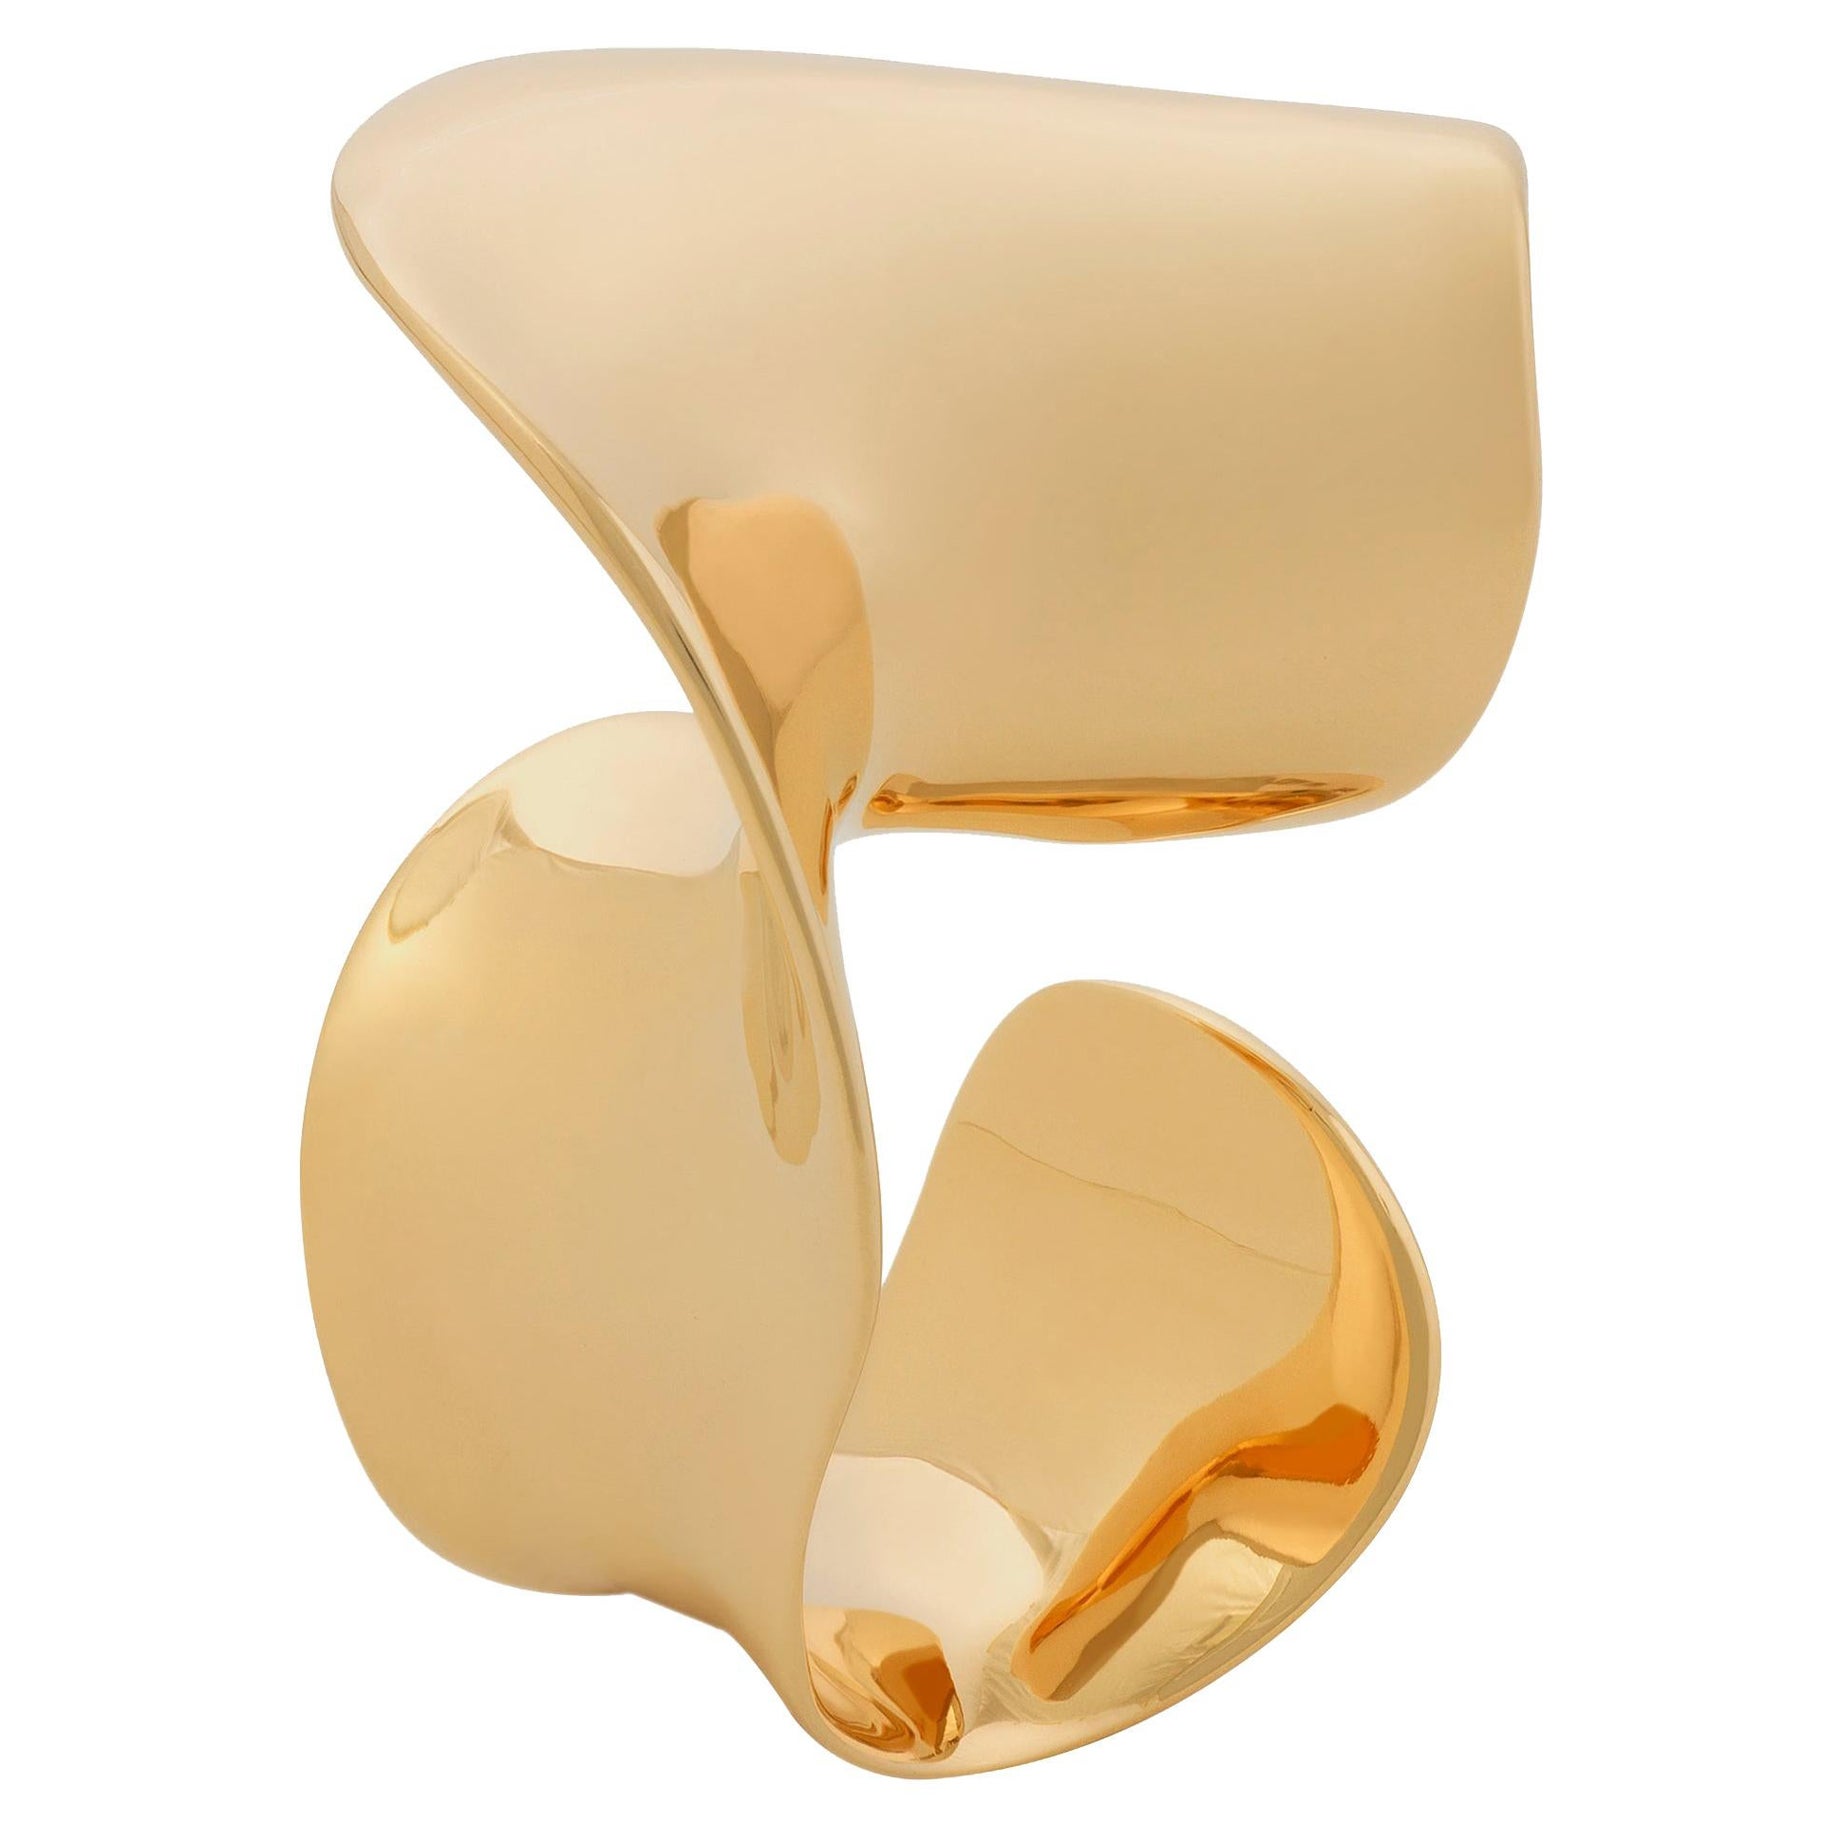 Nathalie Jean Contemporary Limited Edition 18 Karat Gold Sculpture Cocktail Ring For Sale